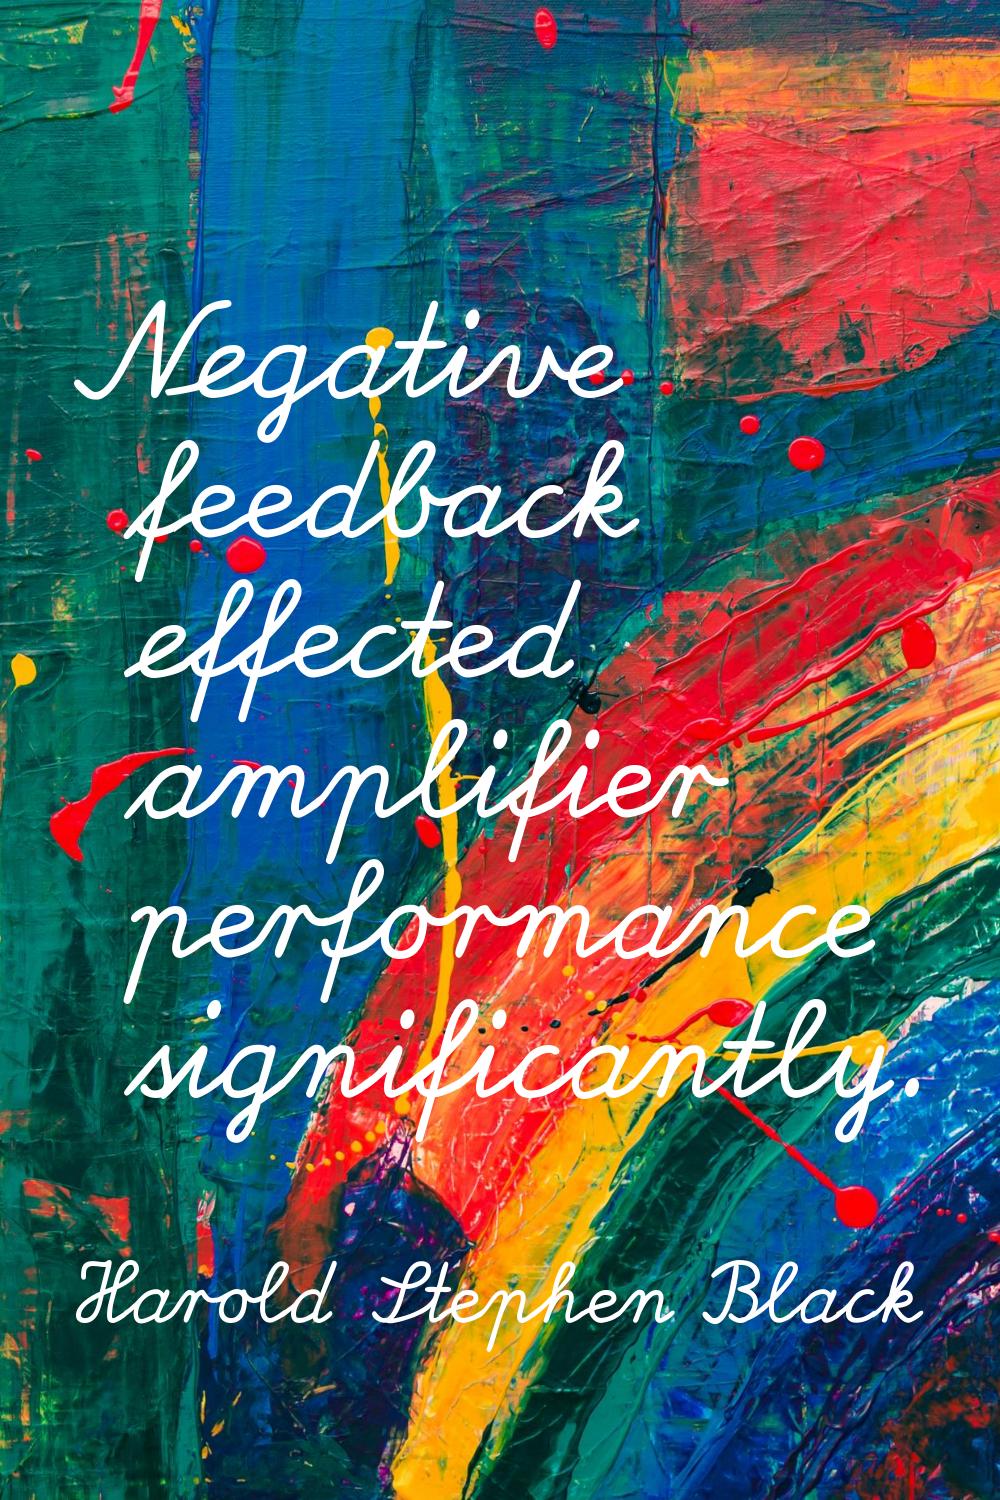 Negative feedback effected amplifier performance significantly.